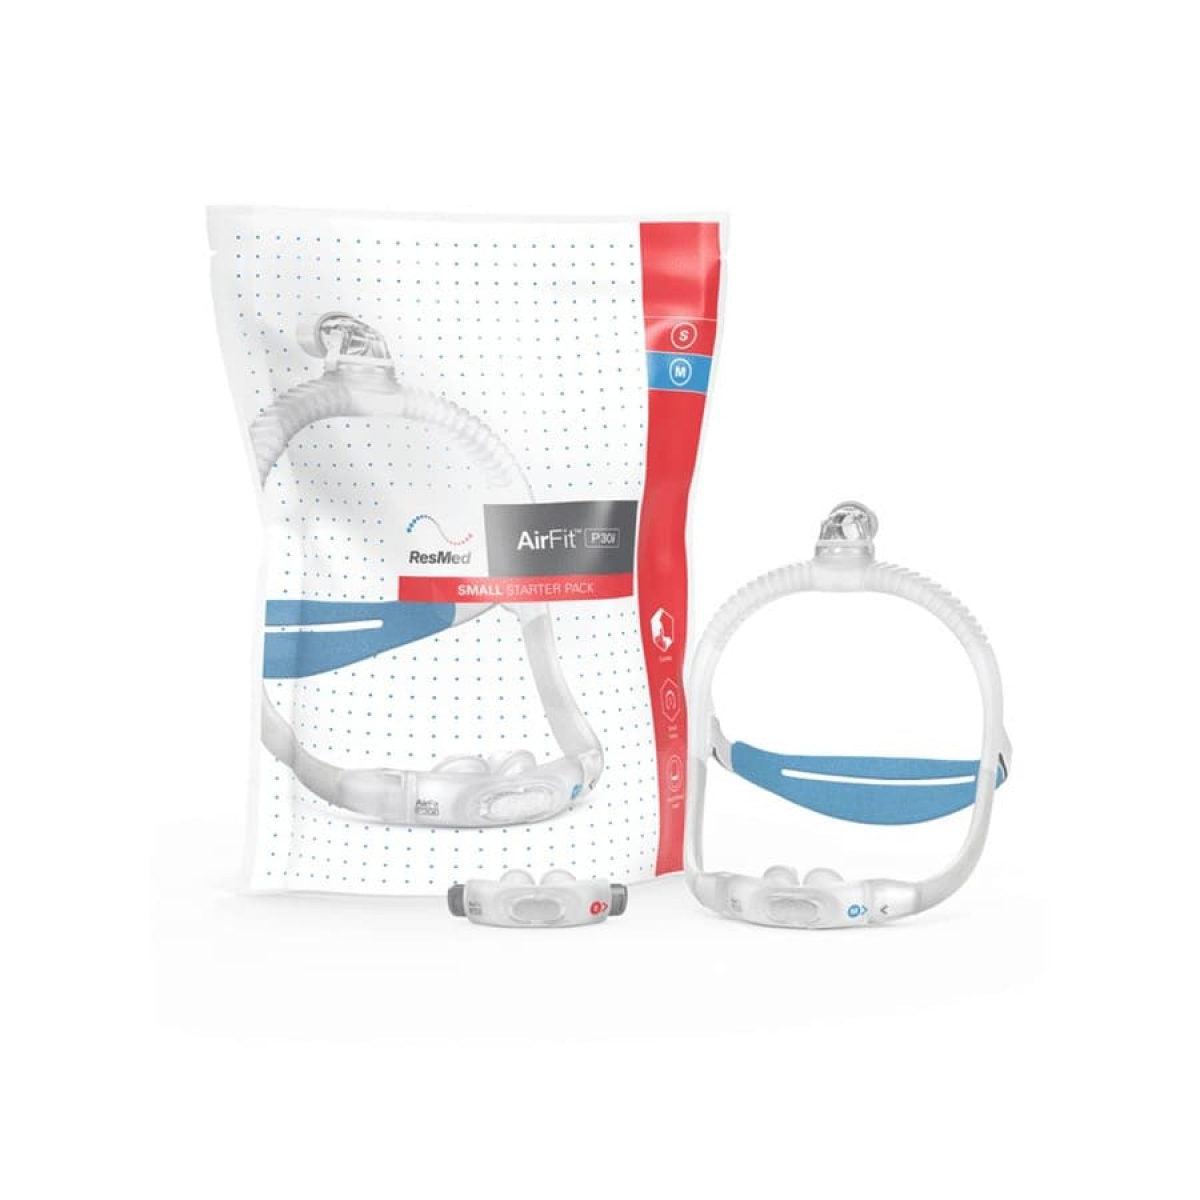 AirFit P30i  Nasal Pillow Mask System